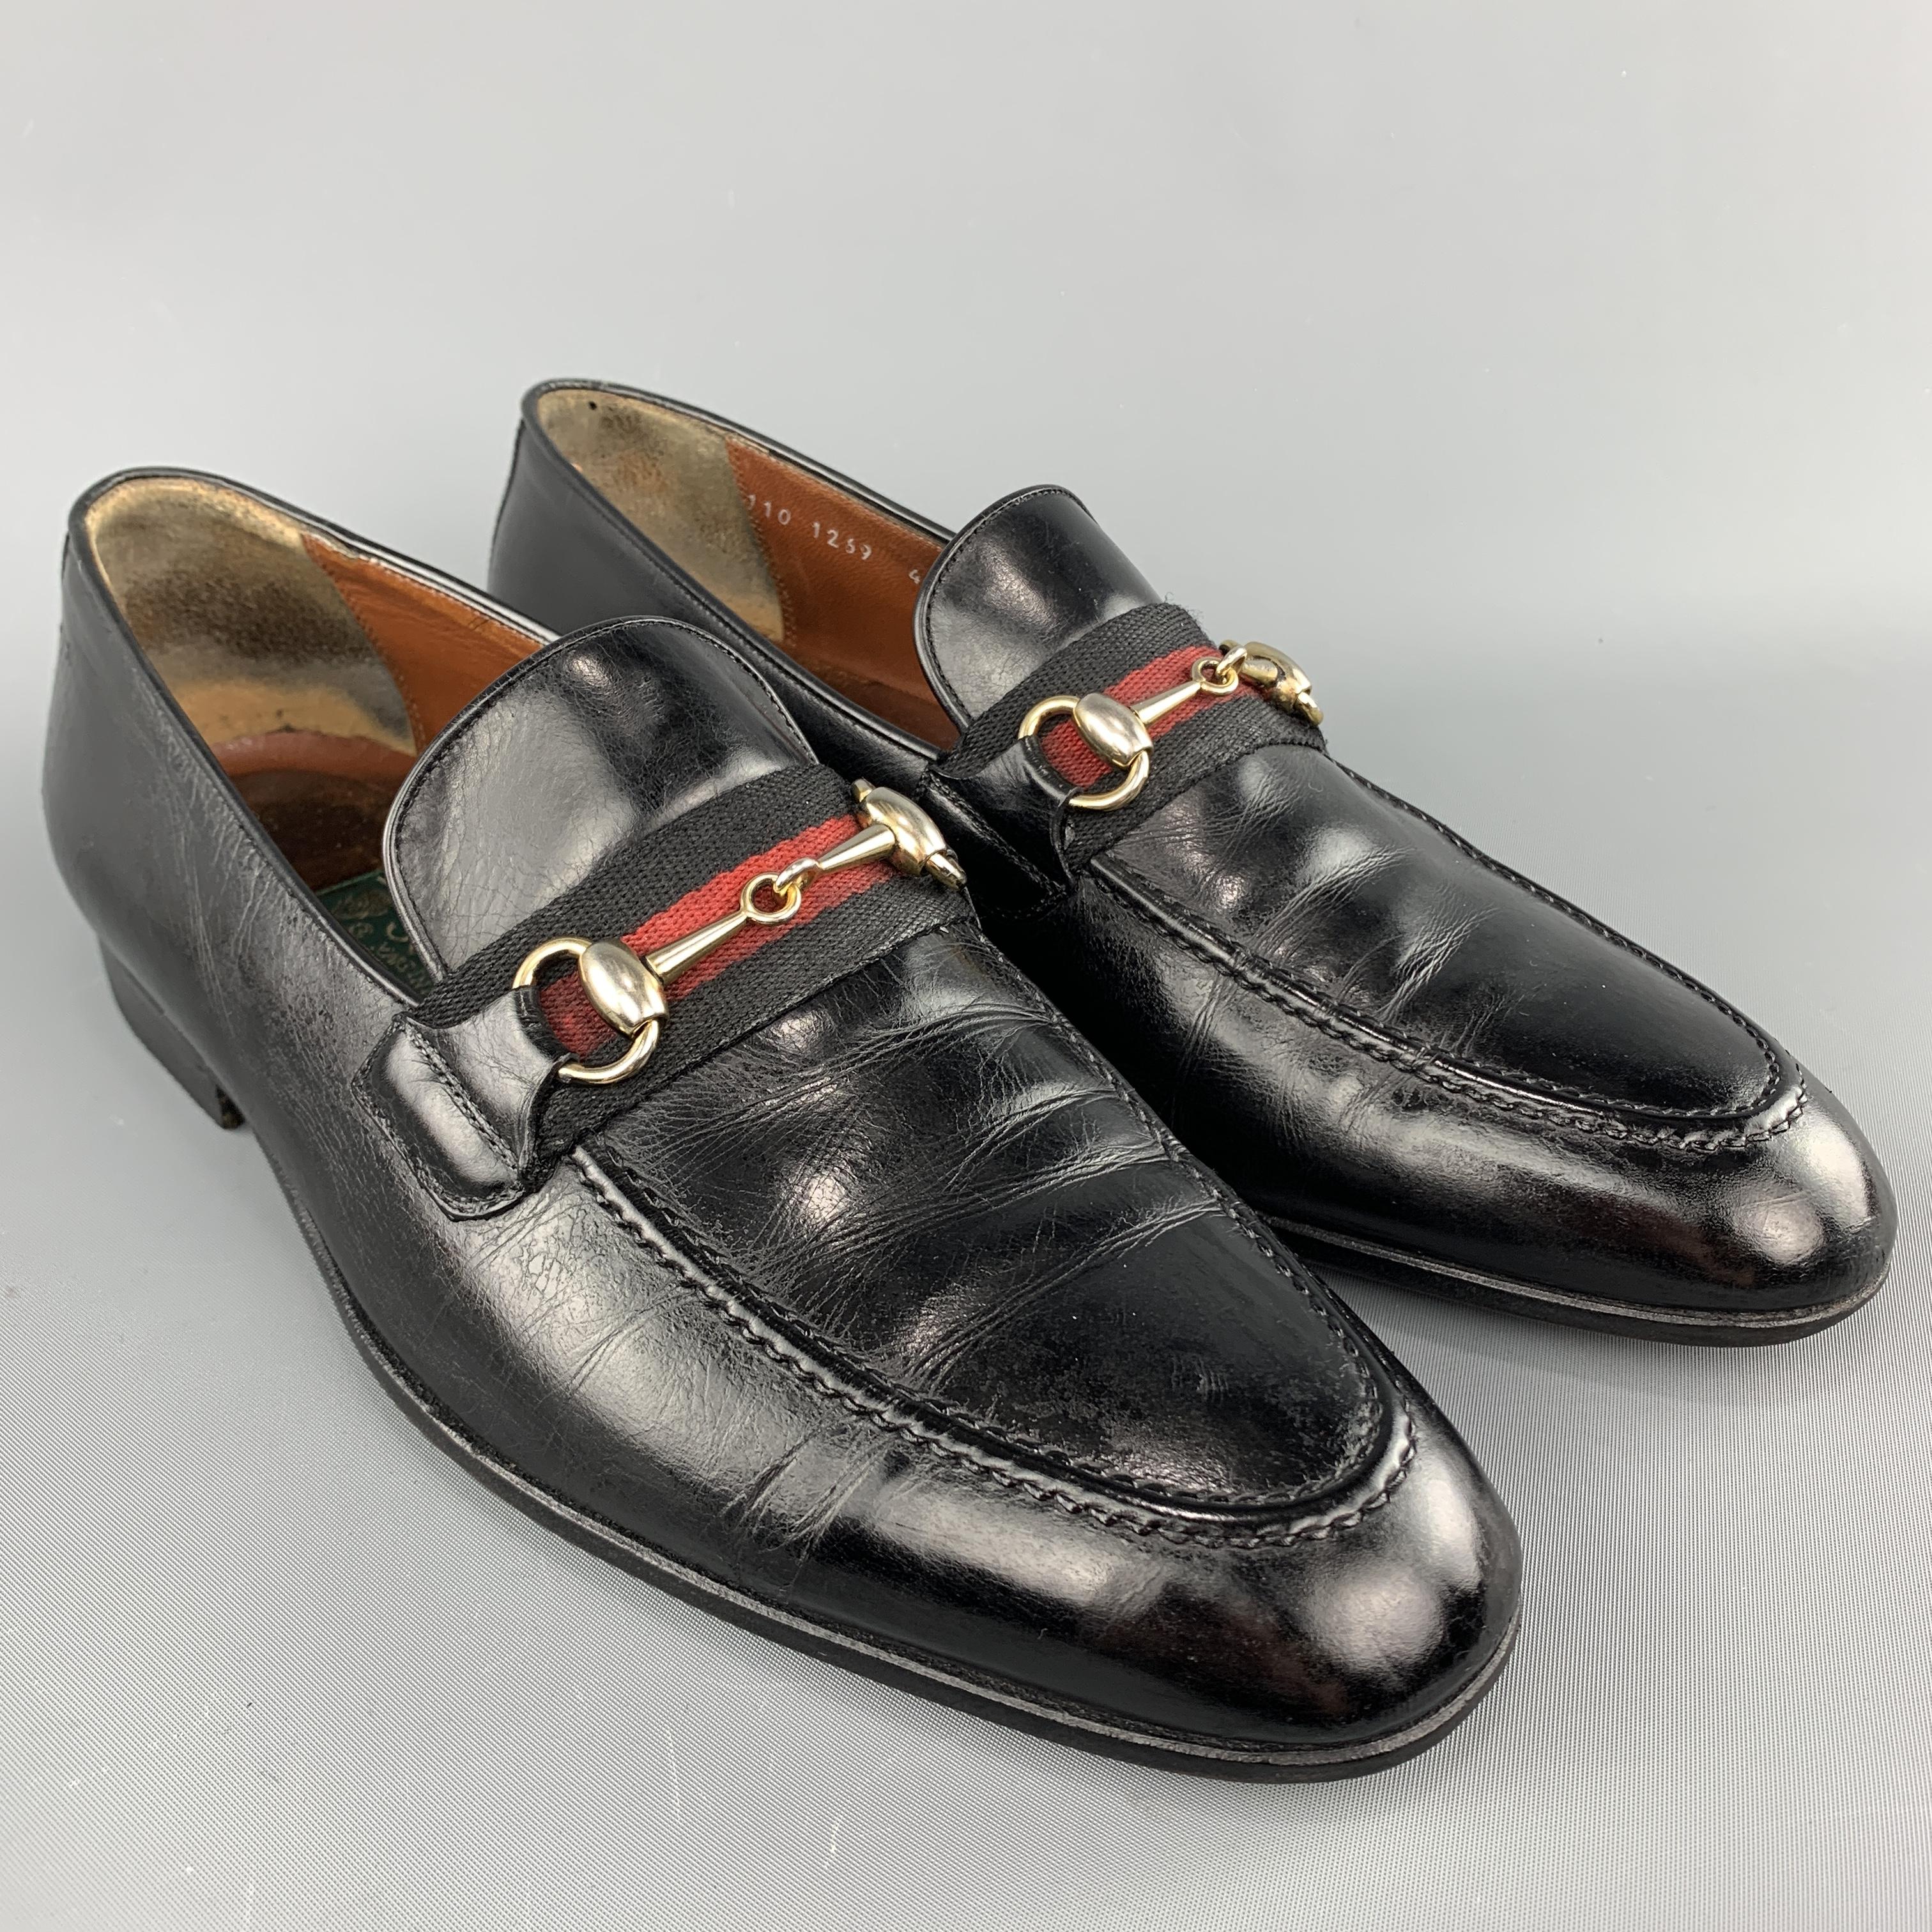 Vintage Gucci loafers come in black leather with a green and red striped webbing strap adorned with gold tone metal horsebit. Wear throughout. As-is. Made in Italy.

Good Vintage Pre-Owned Condition.
Marked: IT 43.5

Outsole: 11.5 x 4 in.